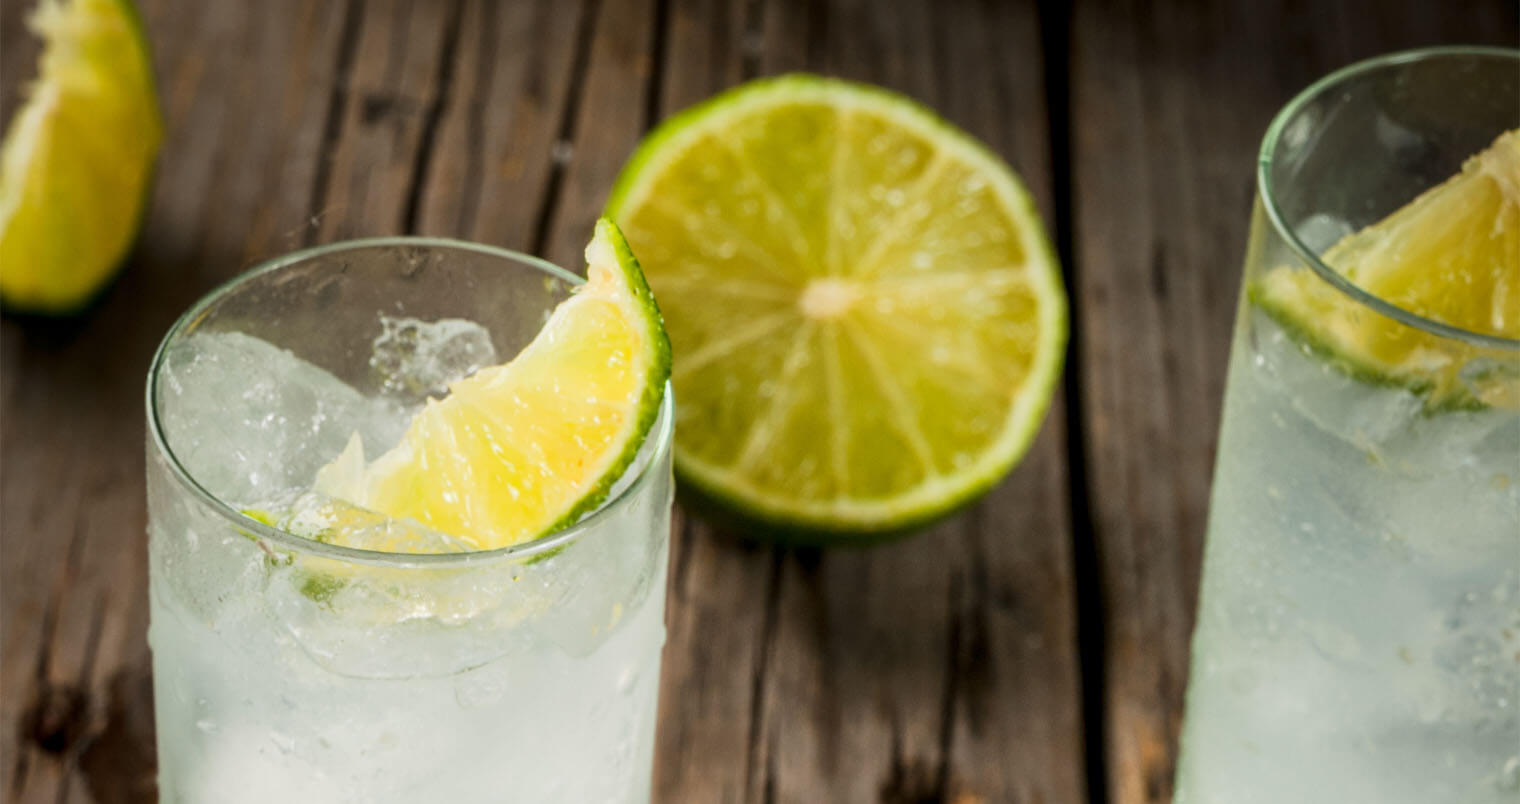 Alcoholic drink. Vodka and tonic highball cocktail with a lime garnish, on an old wooden rustic table., featured image